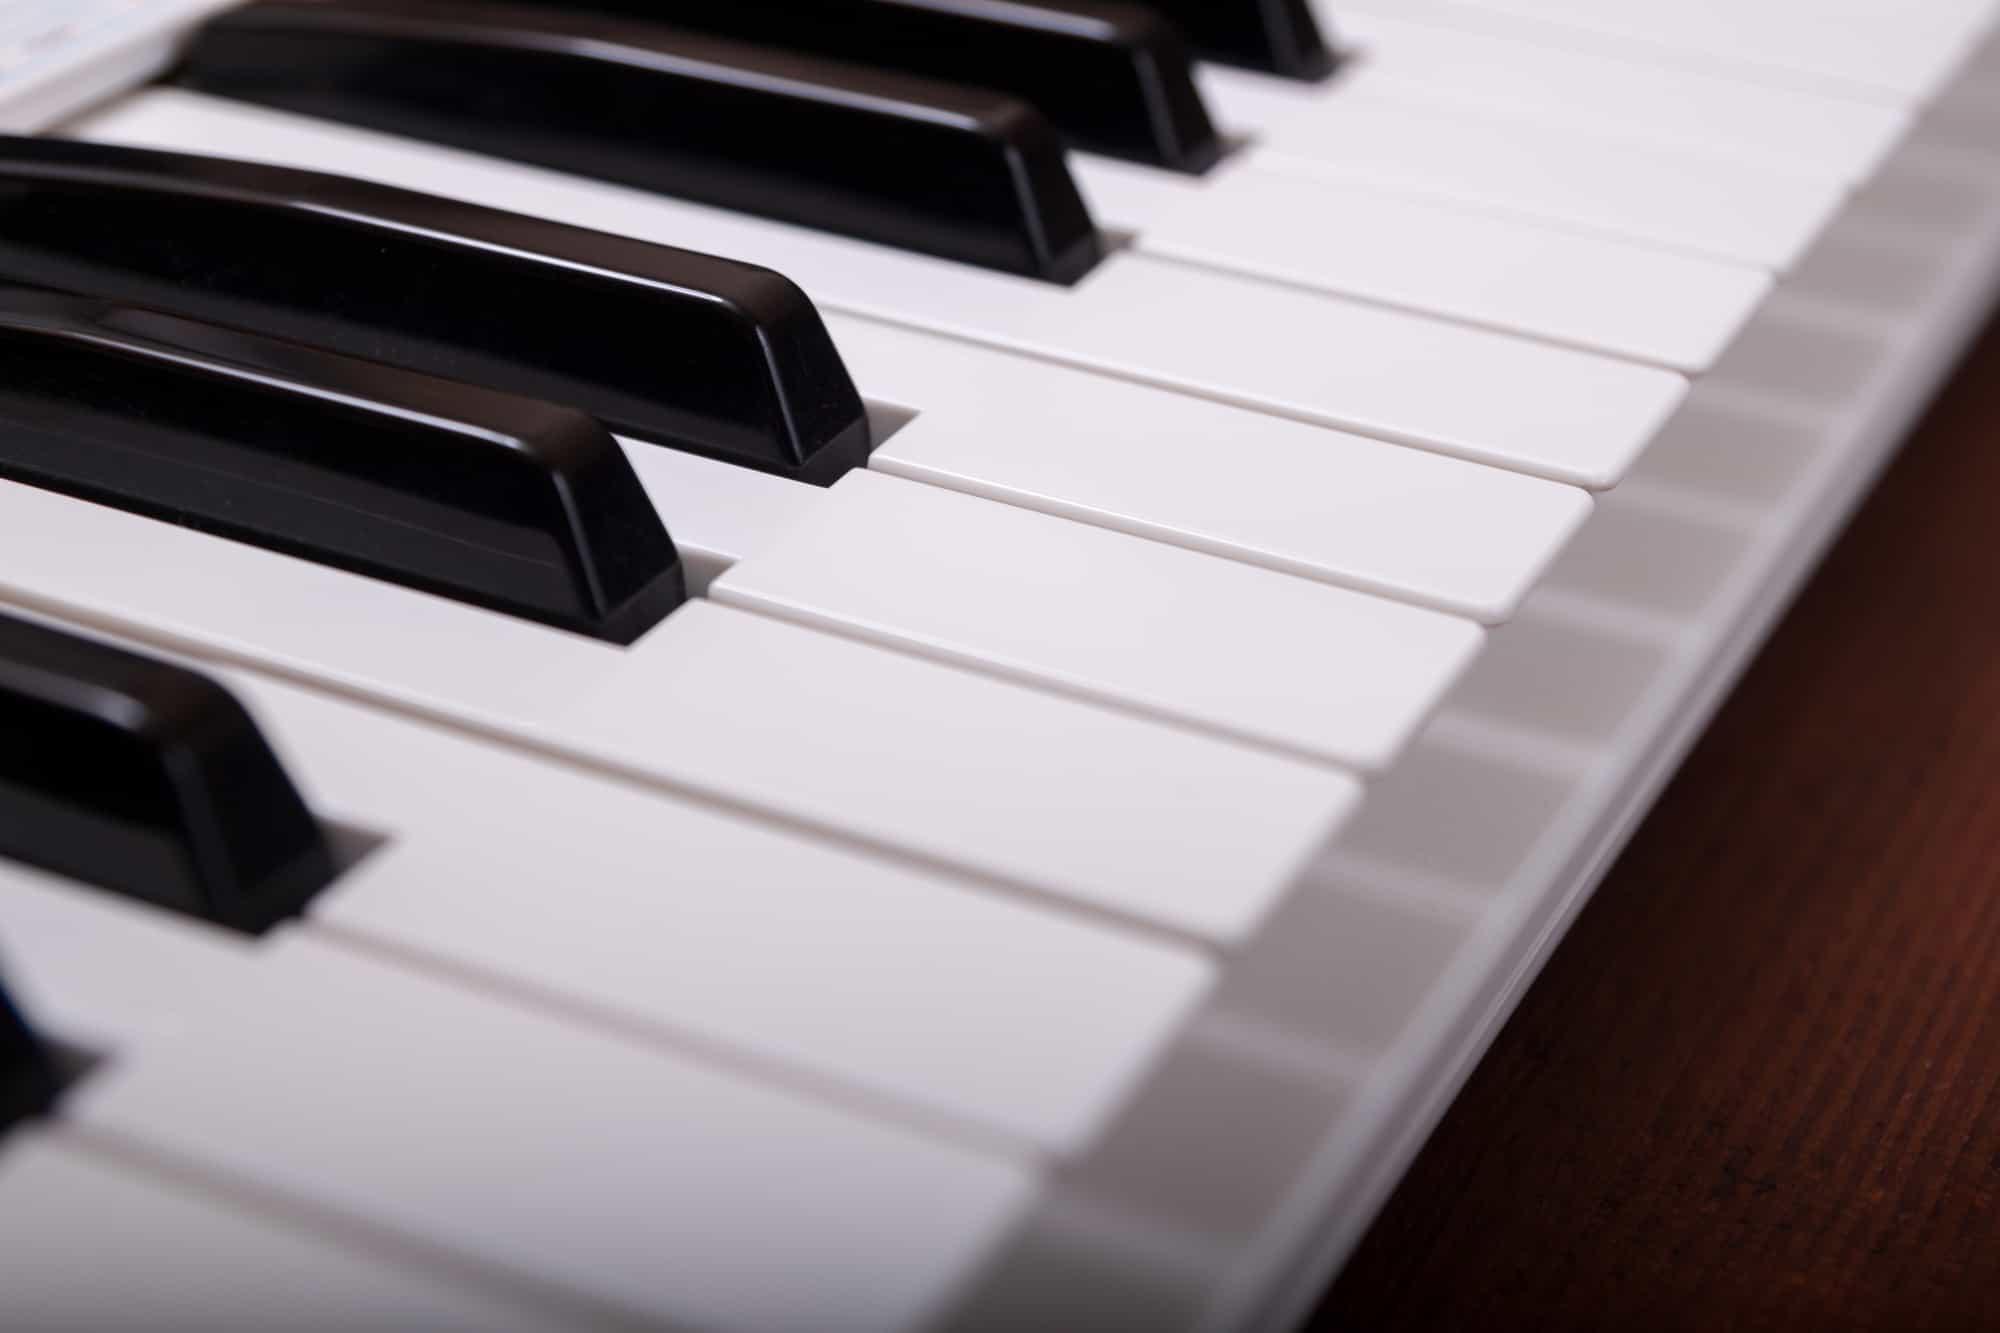 <p>Piano lessons are a common childhood pursuit, but for one user, it was a forced experience they didn’t enjoy and didn’t excel at. Hundreds of hours of practice didn’t make anyone happy or impart any useful skills, leaving them with a funny yet relatable story.</p>